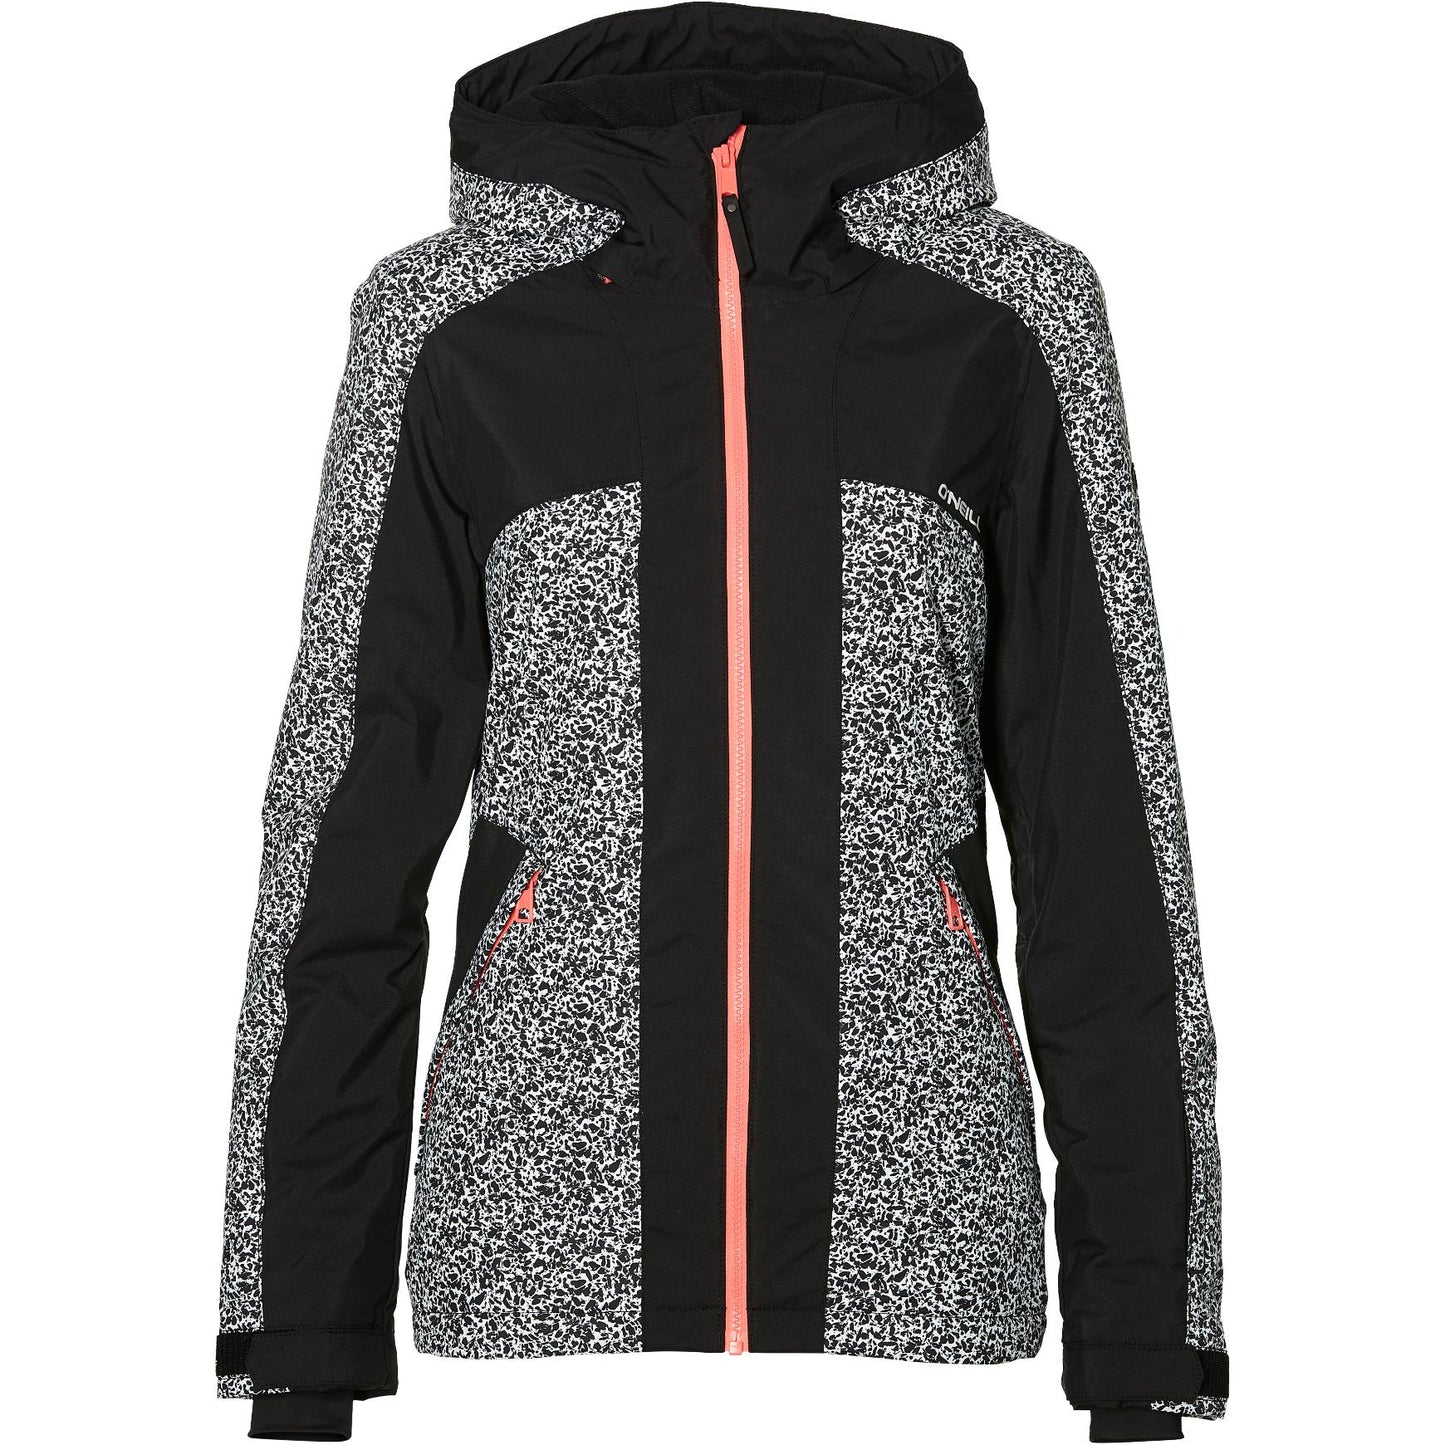 Allure Jacket - White Aop With Black